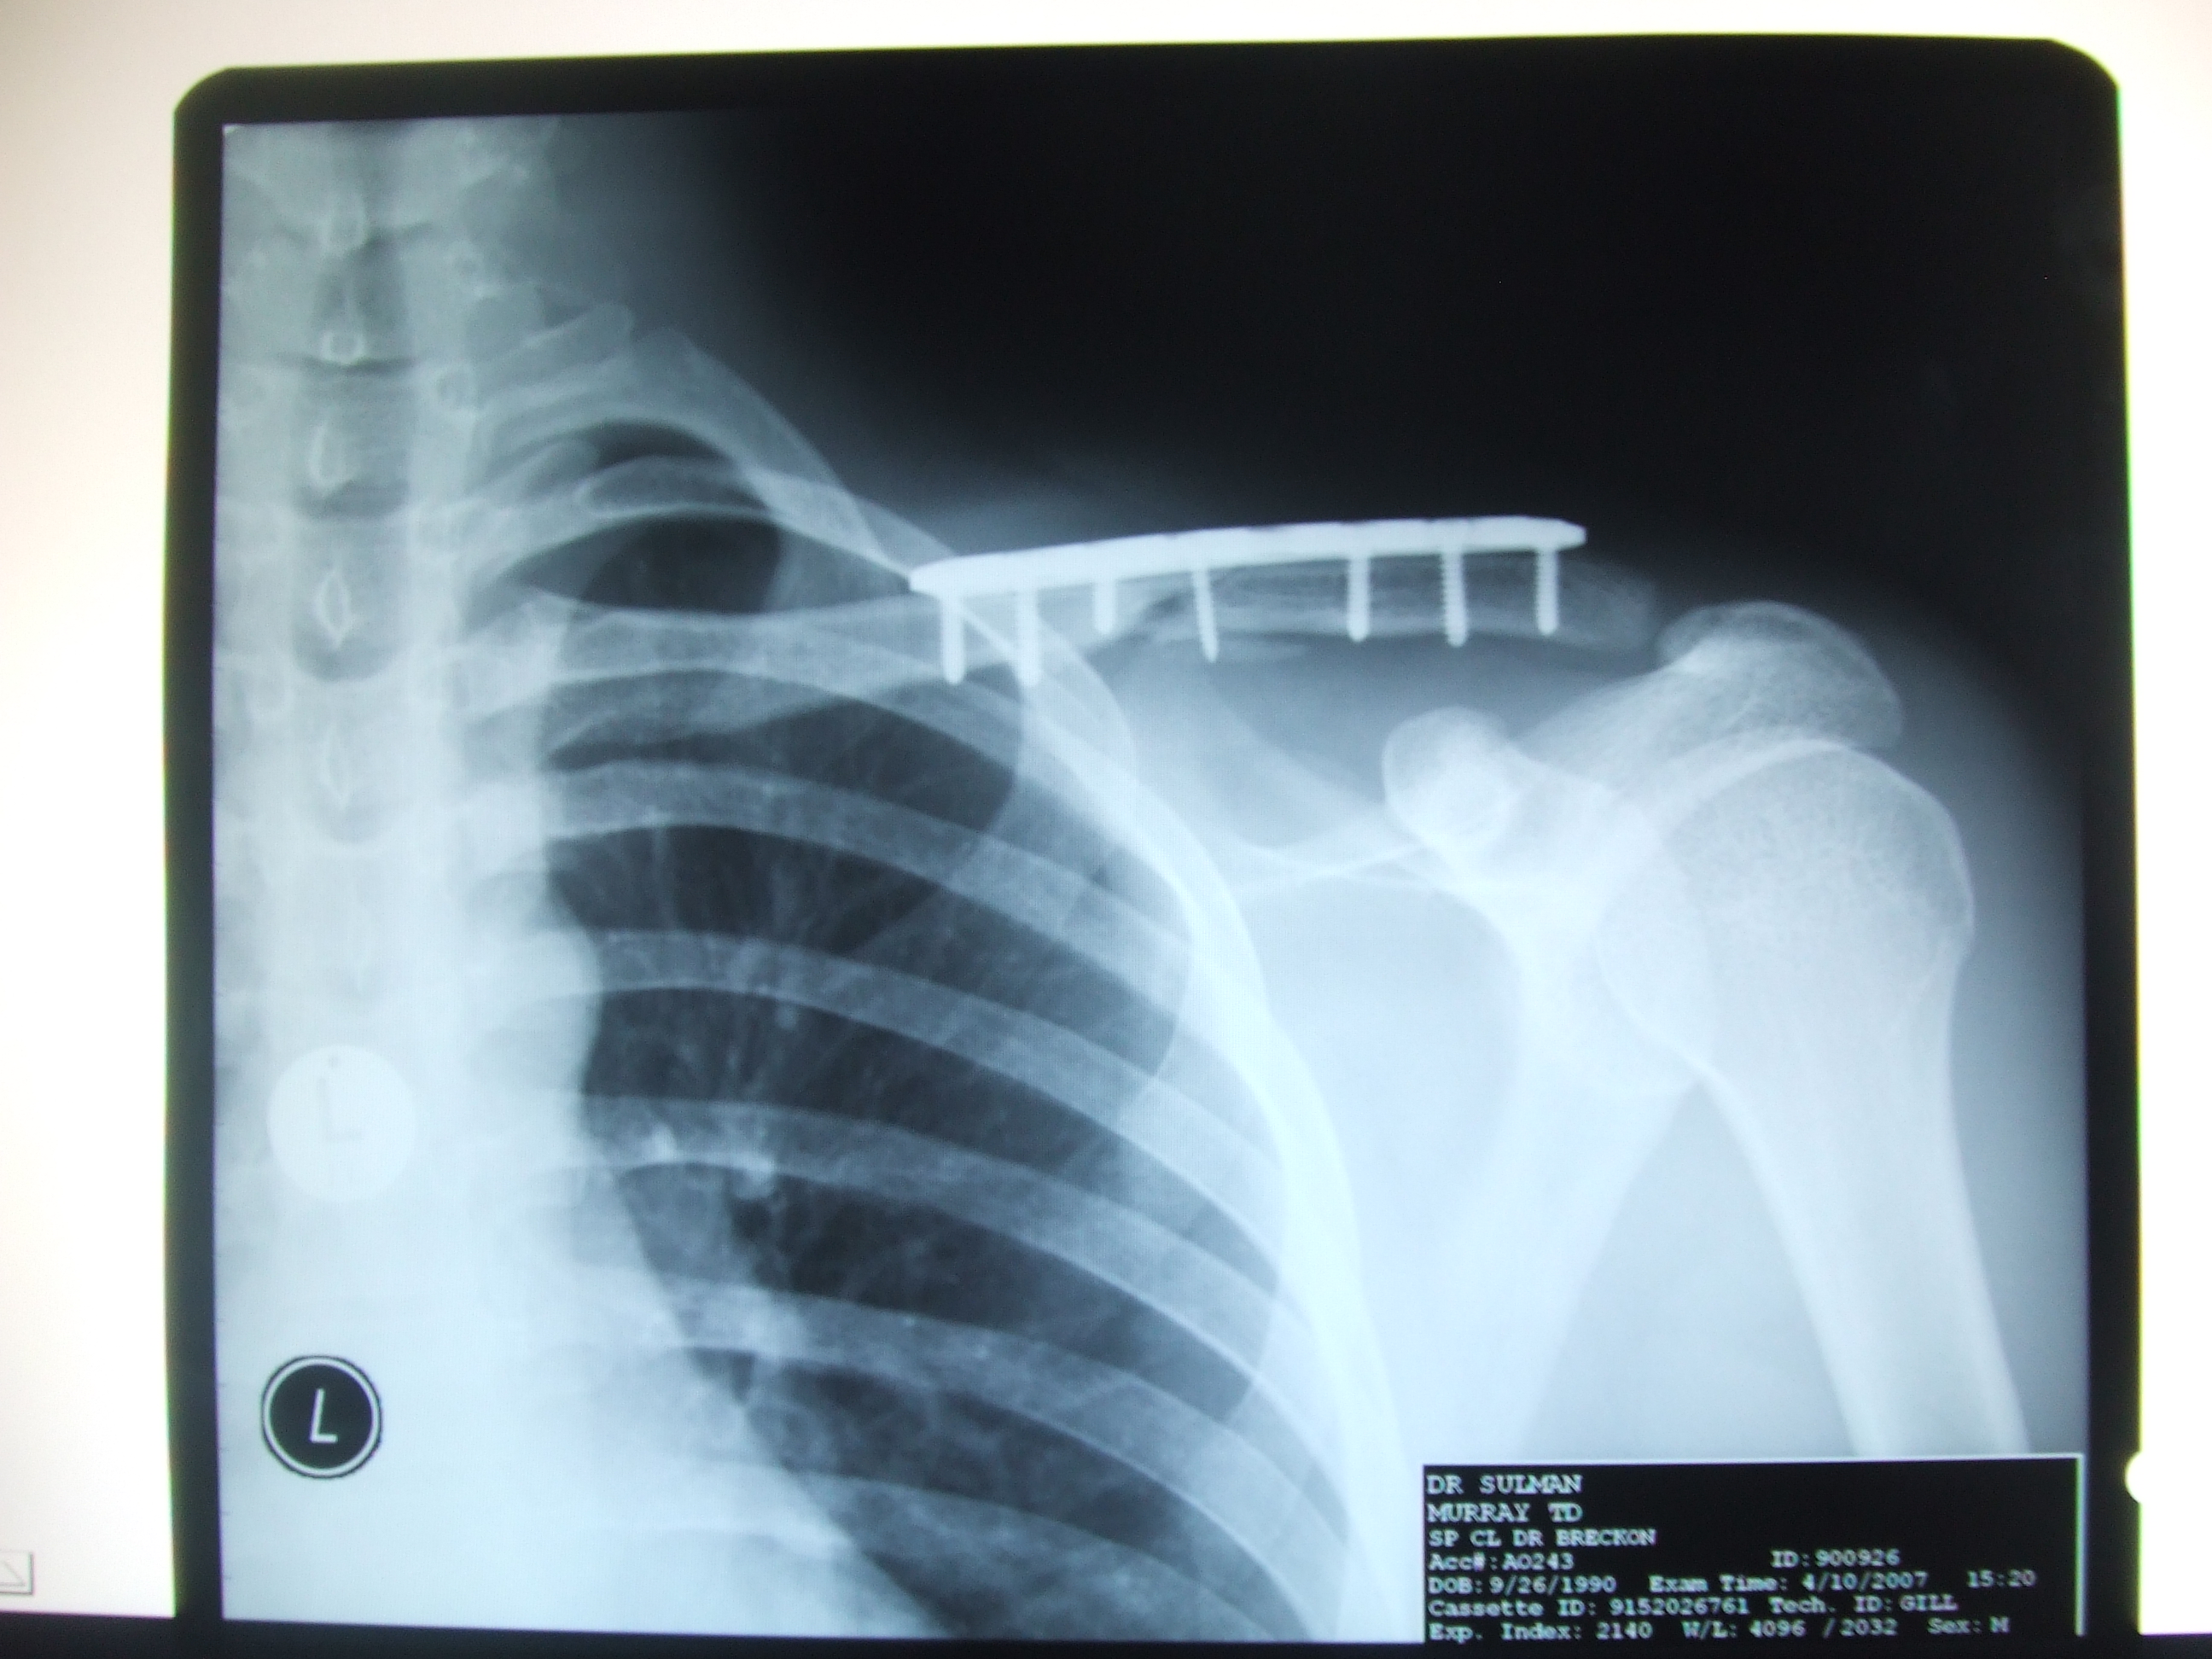 Clavicle fracture - wikidoc